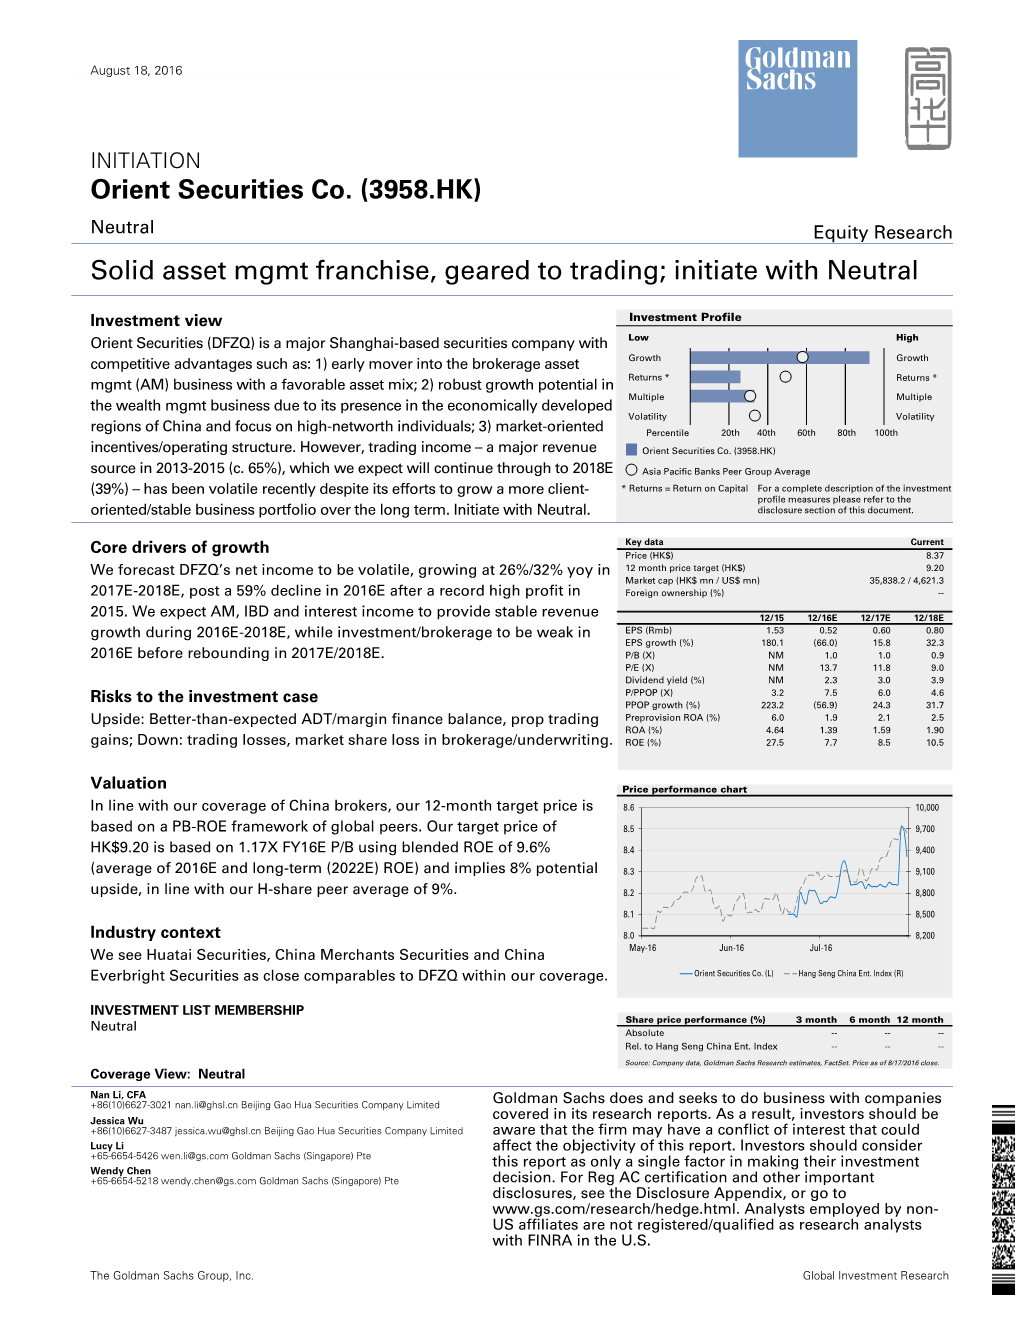 Orient Securities Co. (3958.HK) Solid Asset Mgmt Franchise, Geared